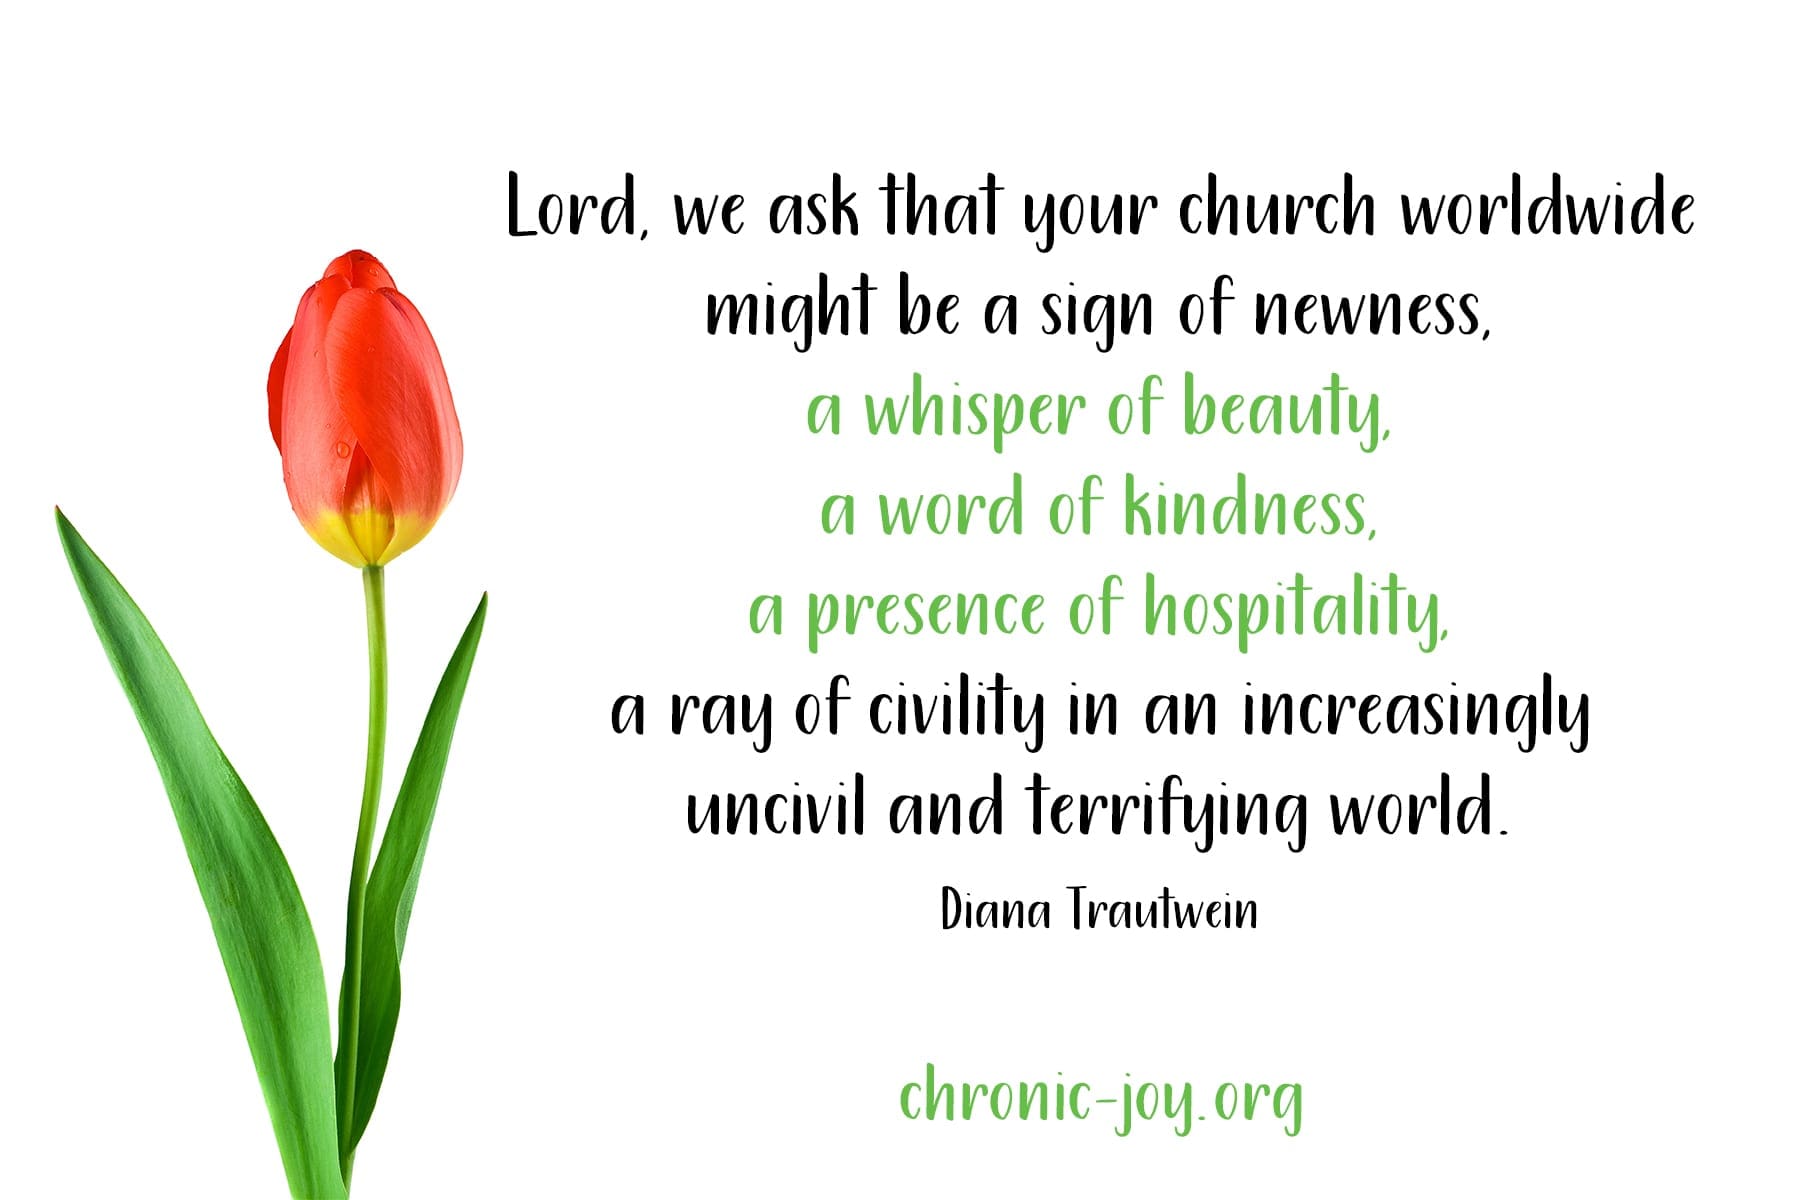 "Lord, we ask that your church worldwide might be a sign of newness, a whisper of beauty, a word of kindness, a presence of hospitality, a ray of civility in an increasingly uncivil and terrifying world." Diana Trautwein